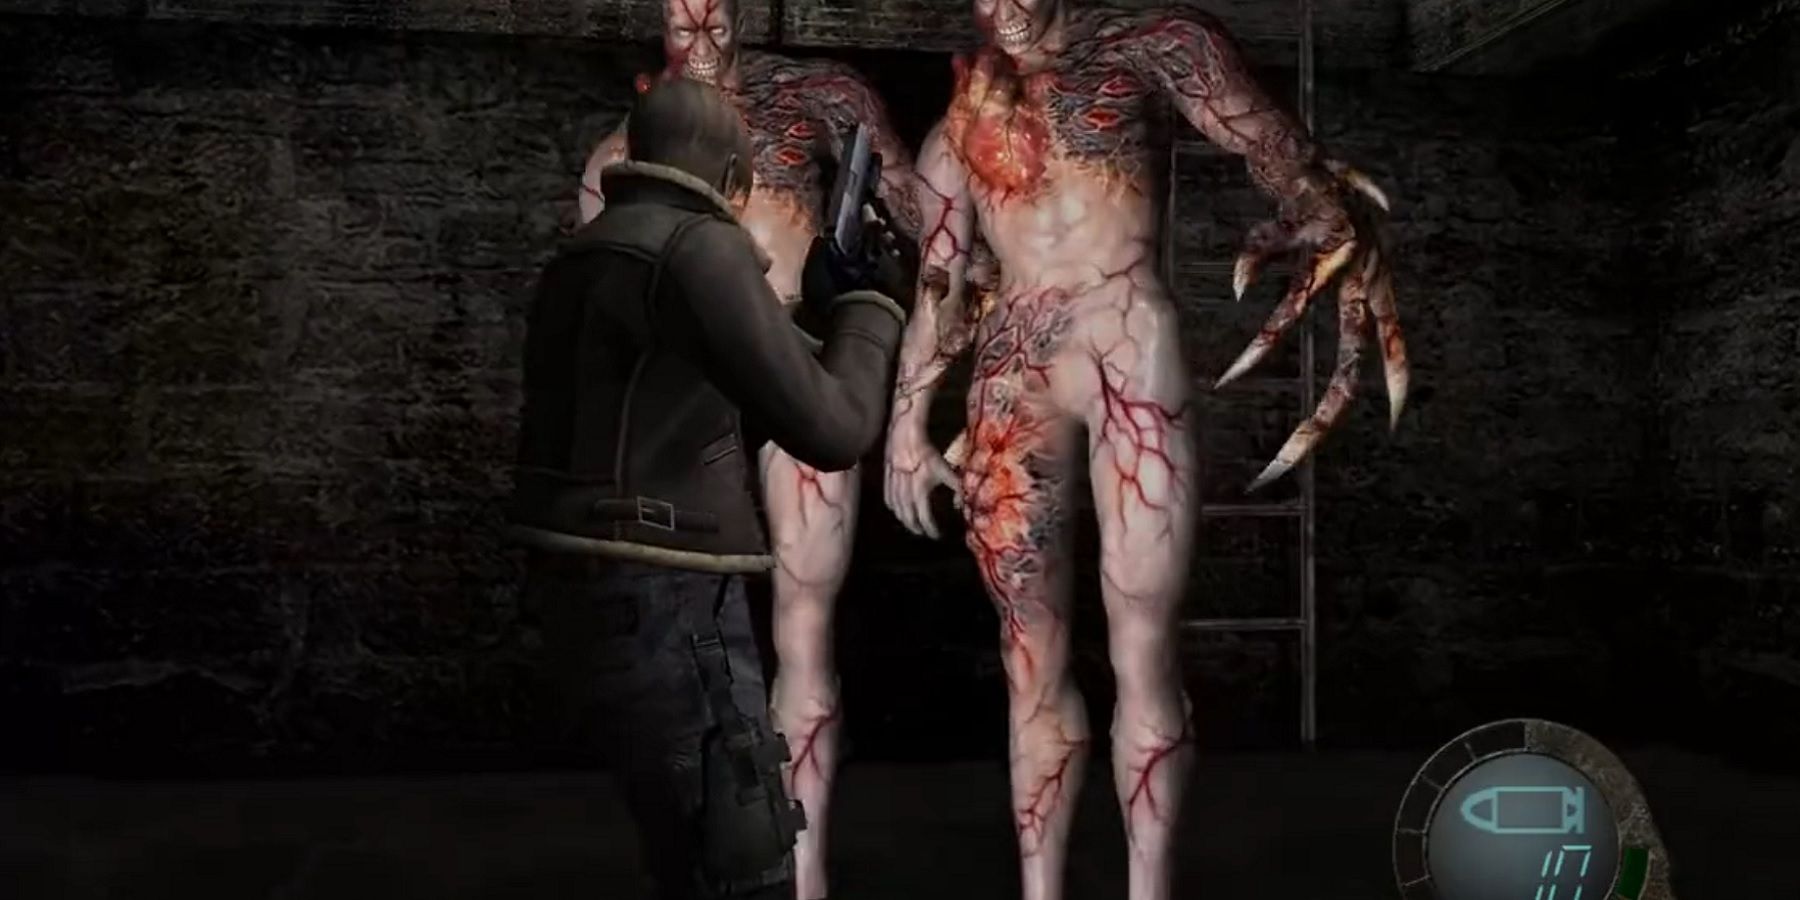 Screenshot from Resident Evil 4 showing two REmake Tyrants approaching Leon Kennedy.